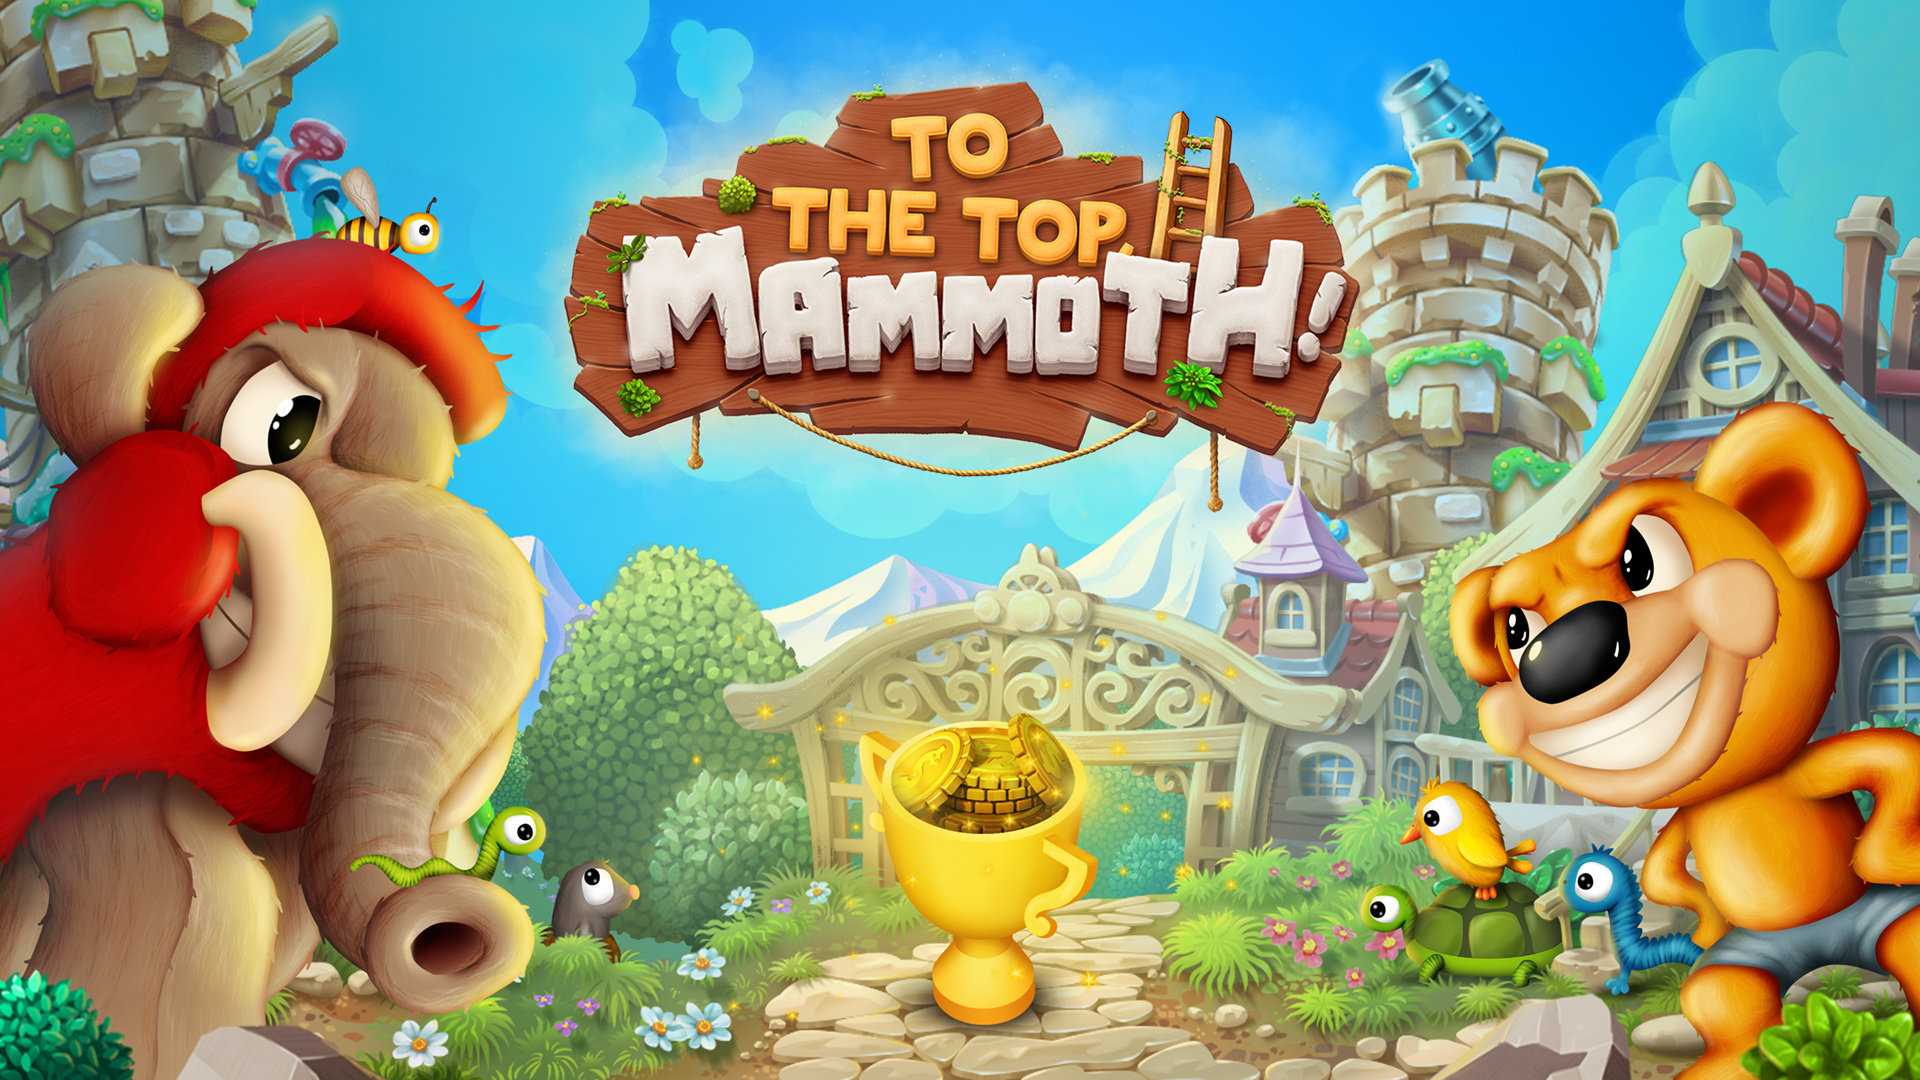 To the Top, Mammoth! - Metacritic